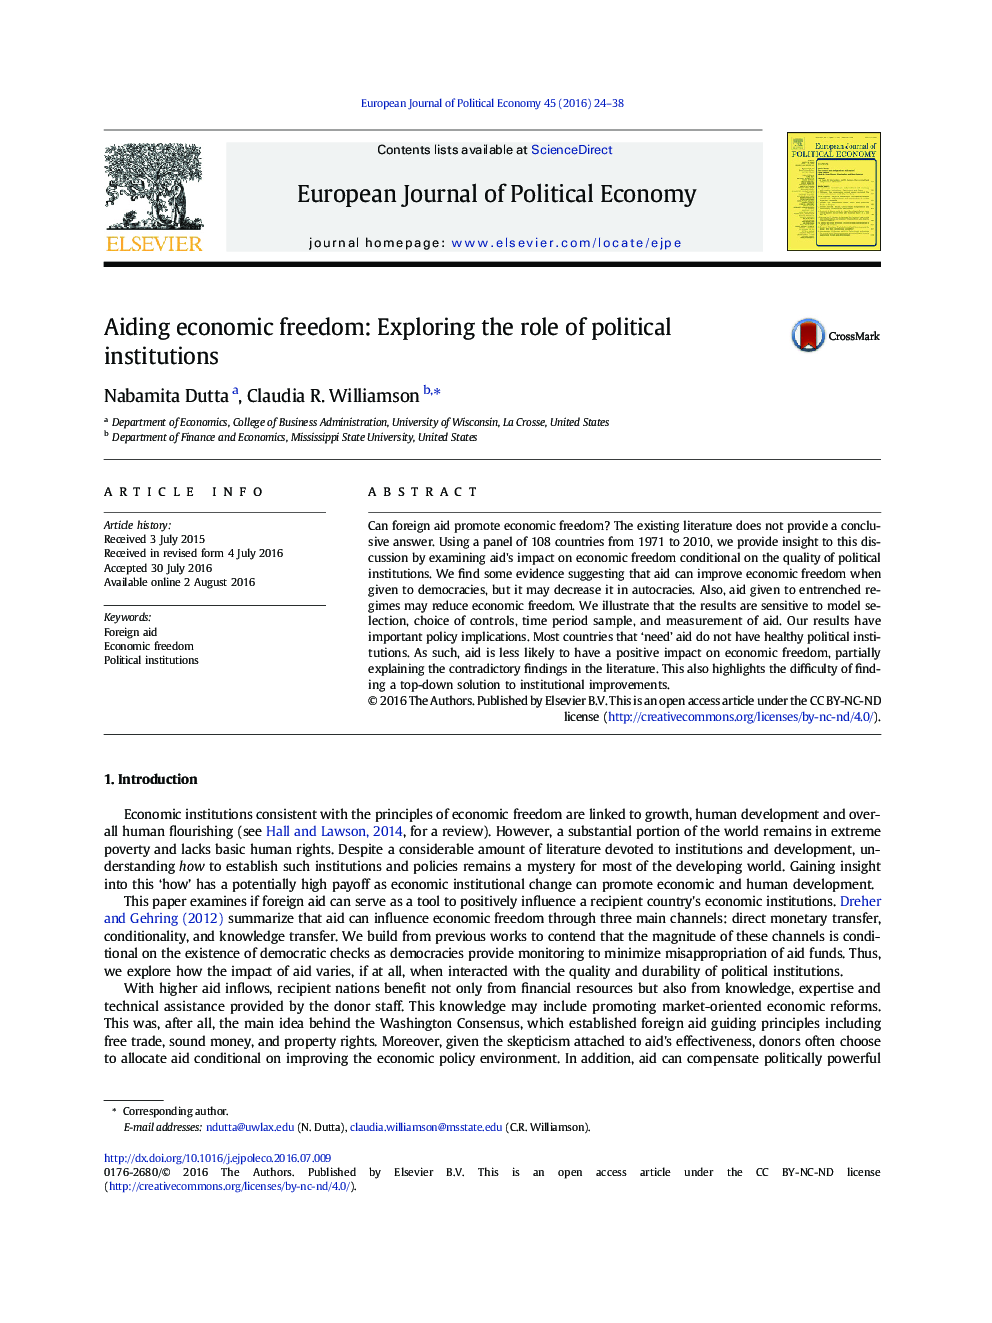 Aiding economic freedom: Exploring the role of political institutions